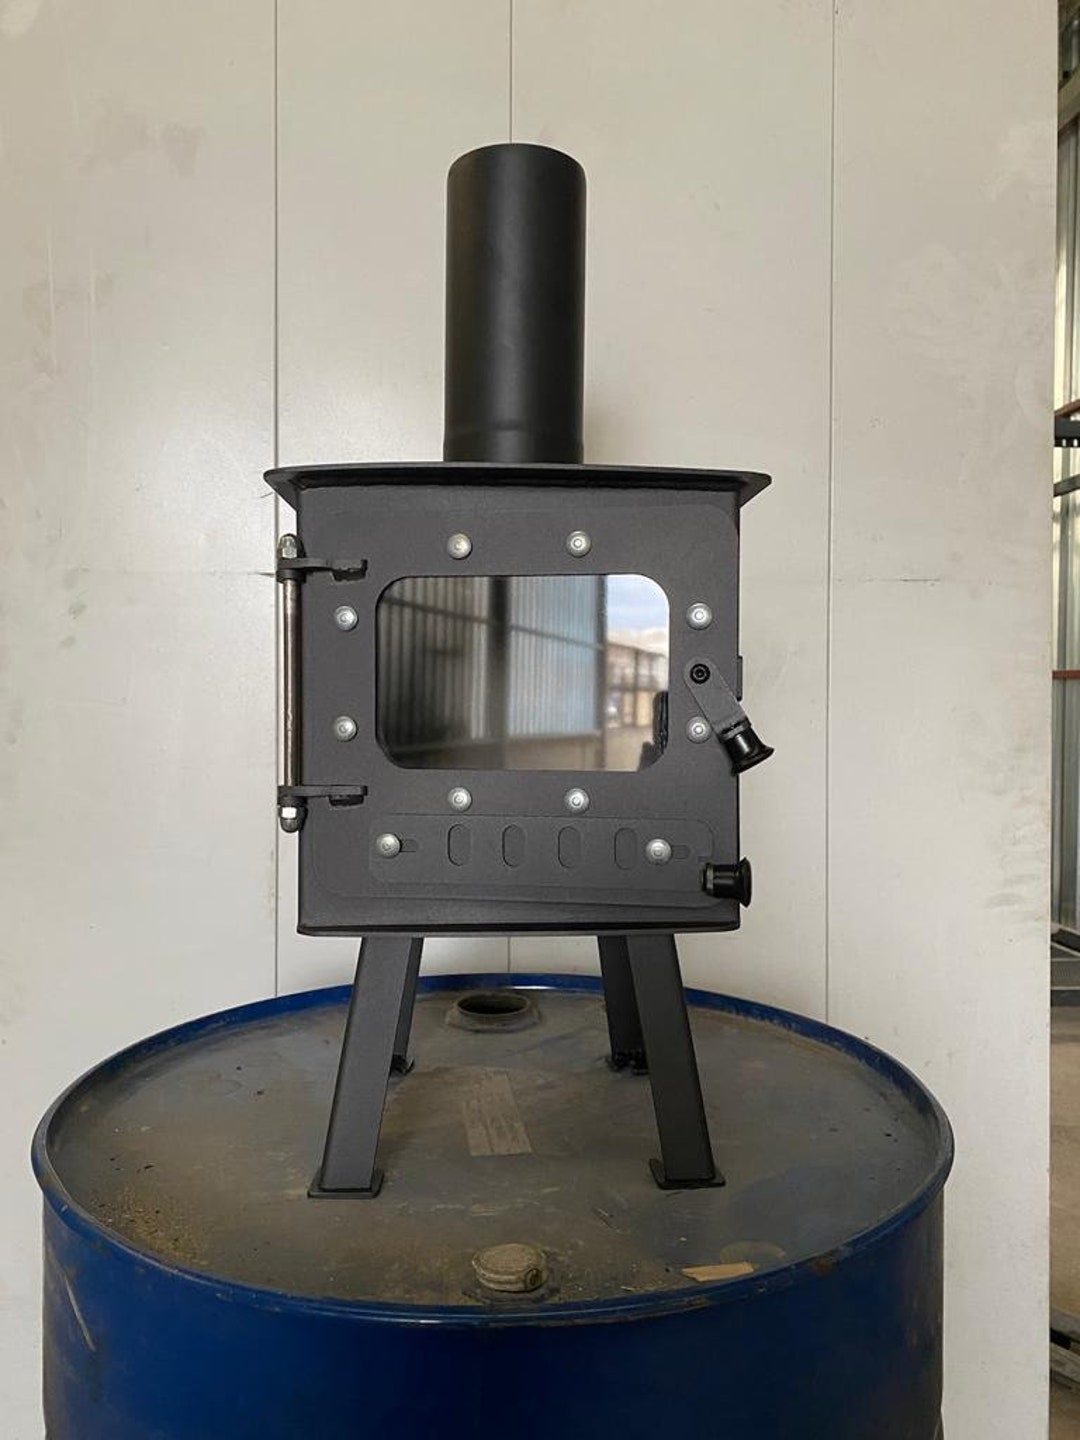 Small Cast Iron Stove for Outdoor Camping | Outdoor Stove | Mini Camping  Stove | Cast Iron Fireplace | Brick Lined Fireplace | Tiny House Stove  Cabin